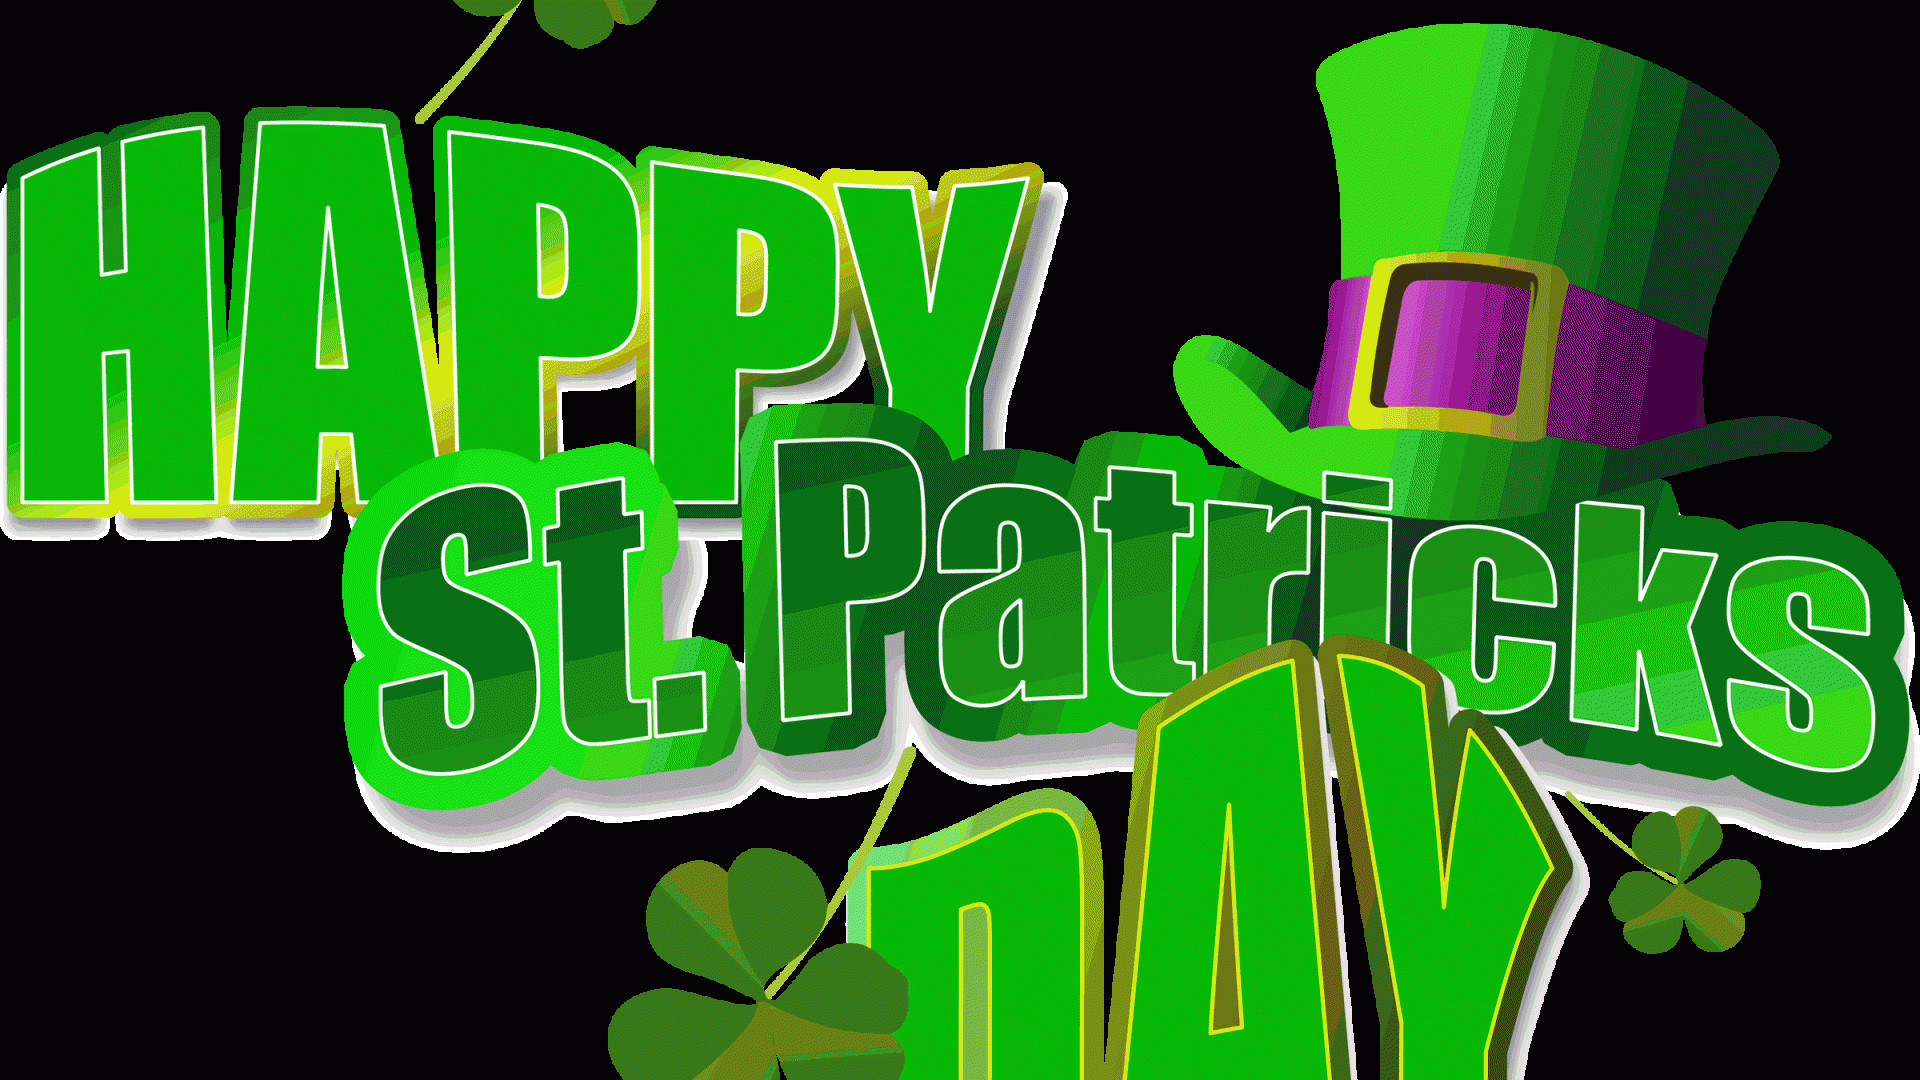 St Patrick S Day Dark Green Background Wallpaper Image For Free Download   Pngtree